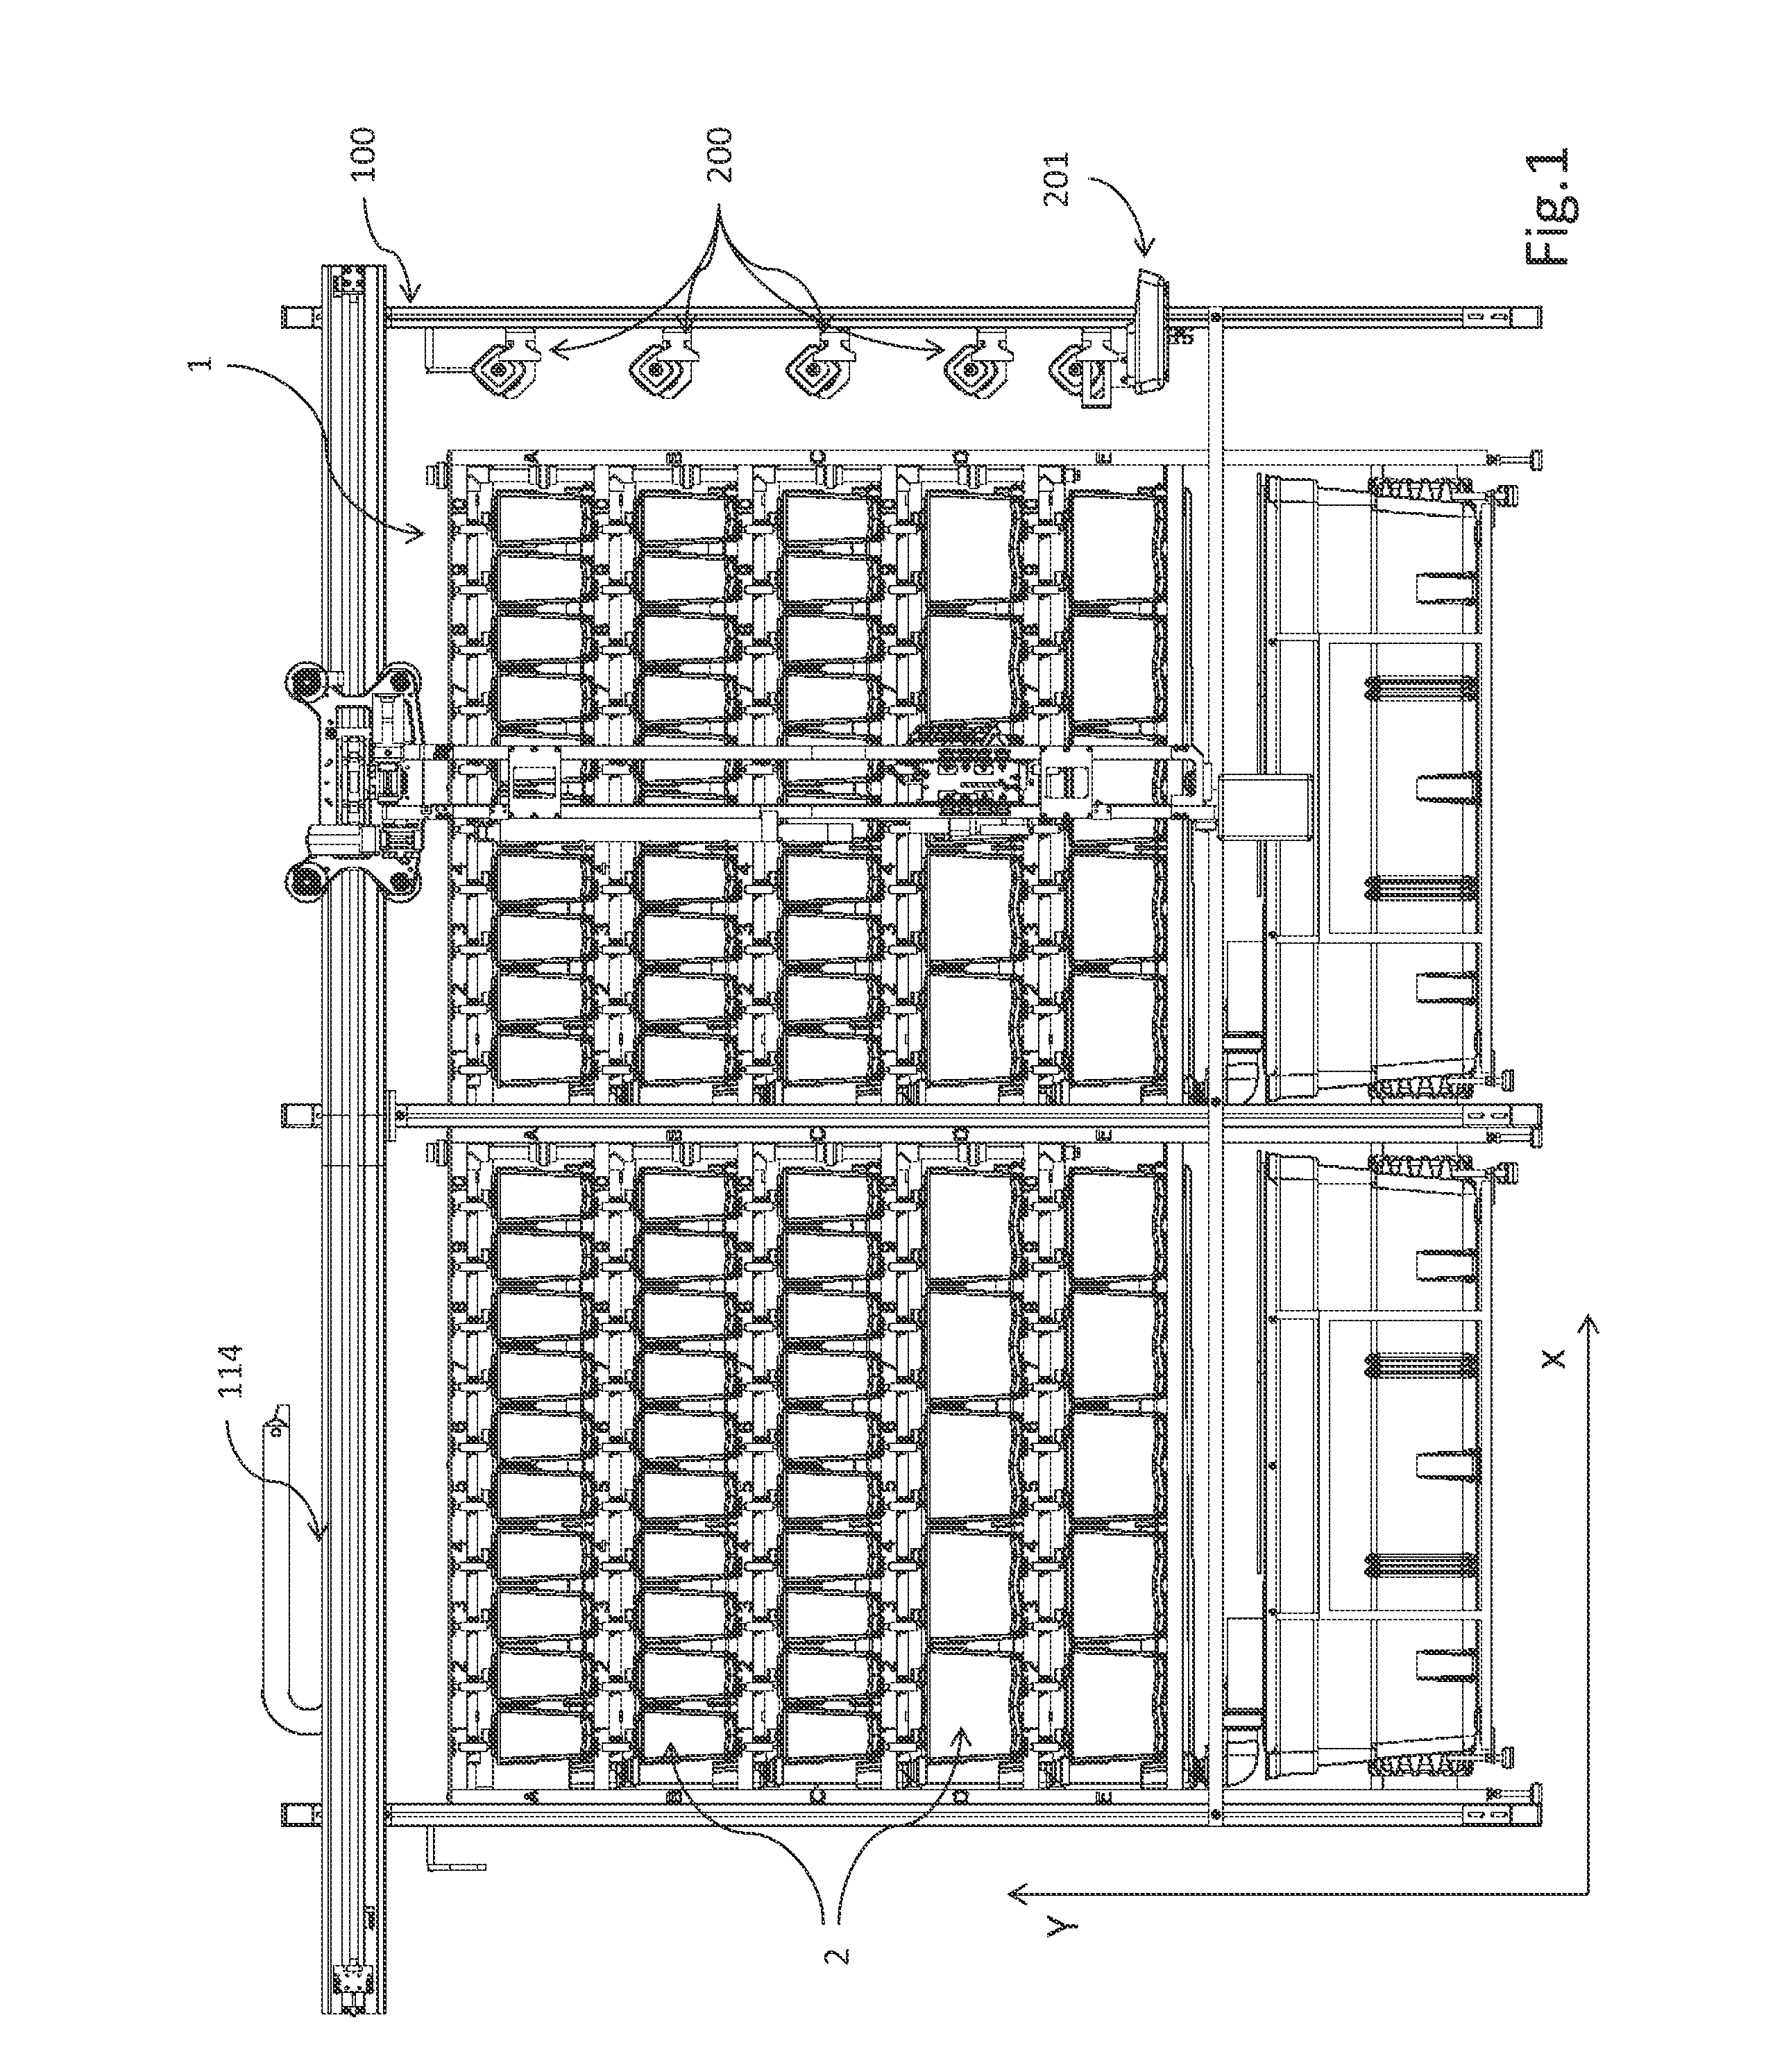 Automated system for controlled distribution of substances to animal containment devices in an animal housing facility